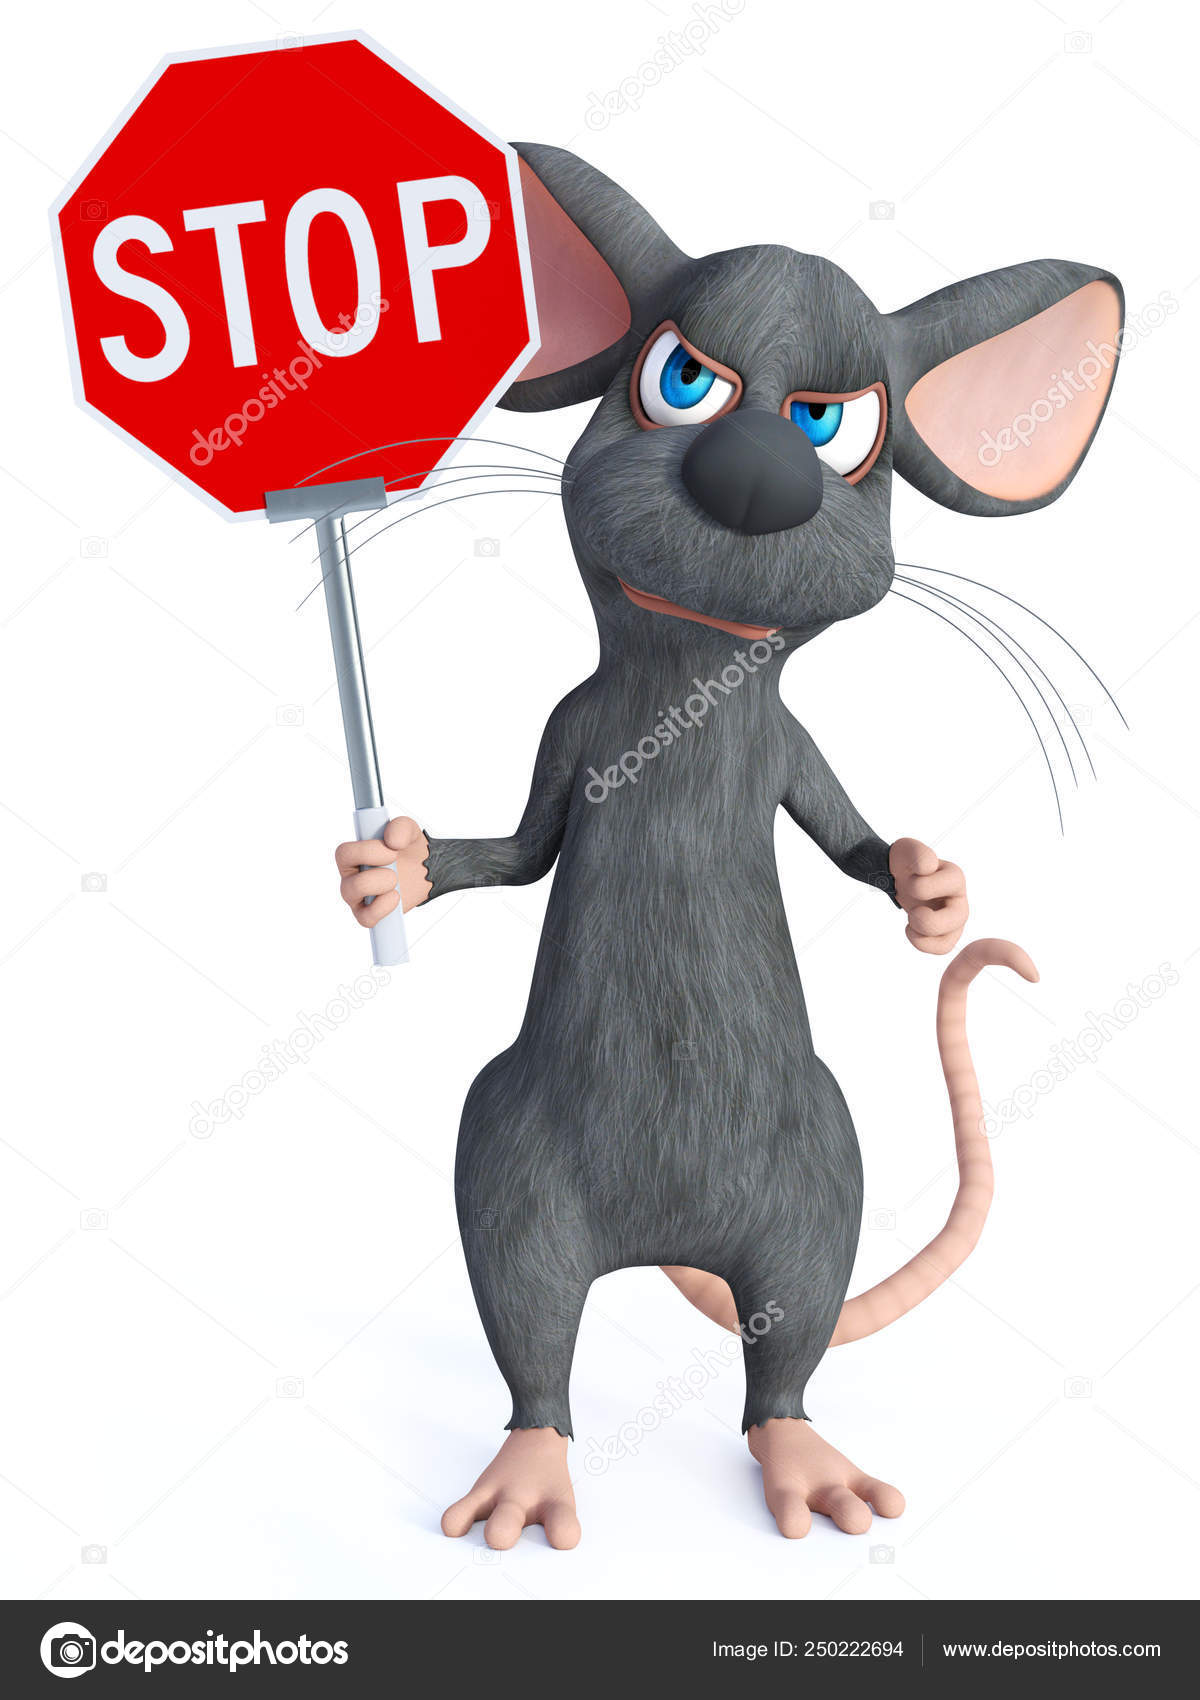 Go Away, 3D Rendering, A Red Stop Sign Stock Photo, Picture and